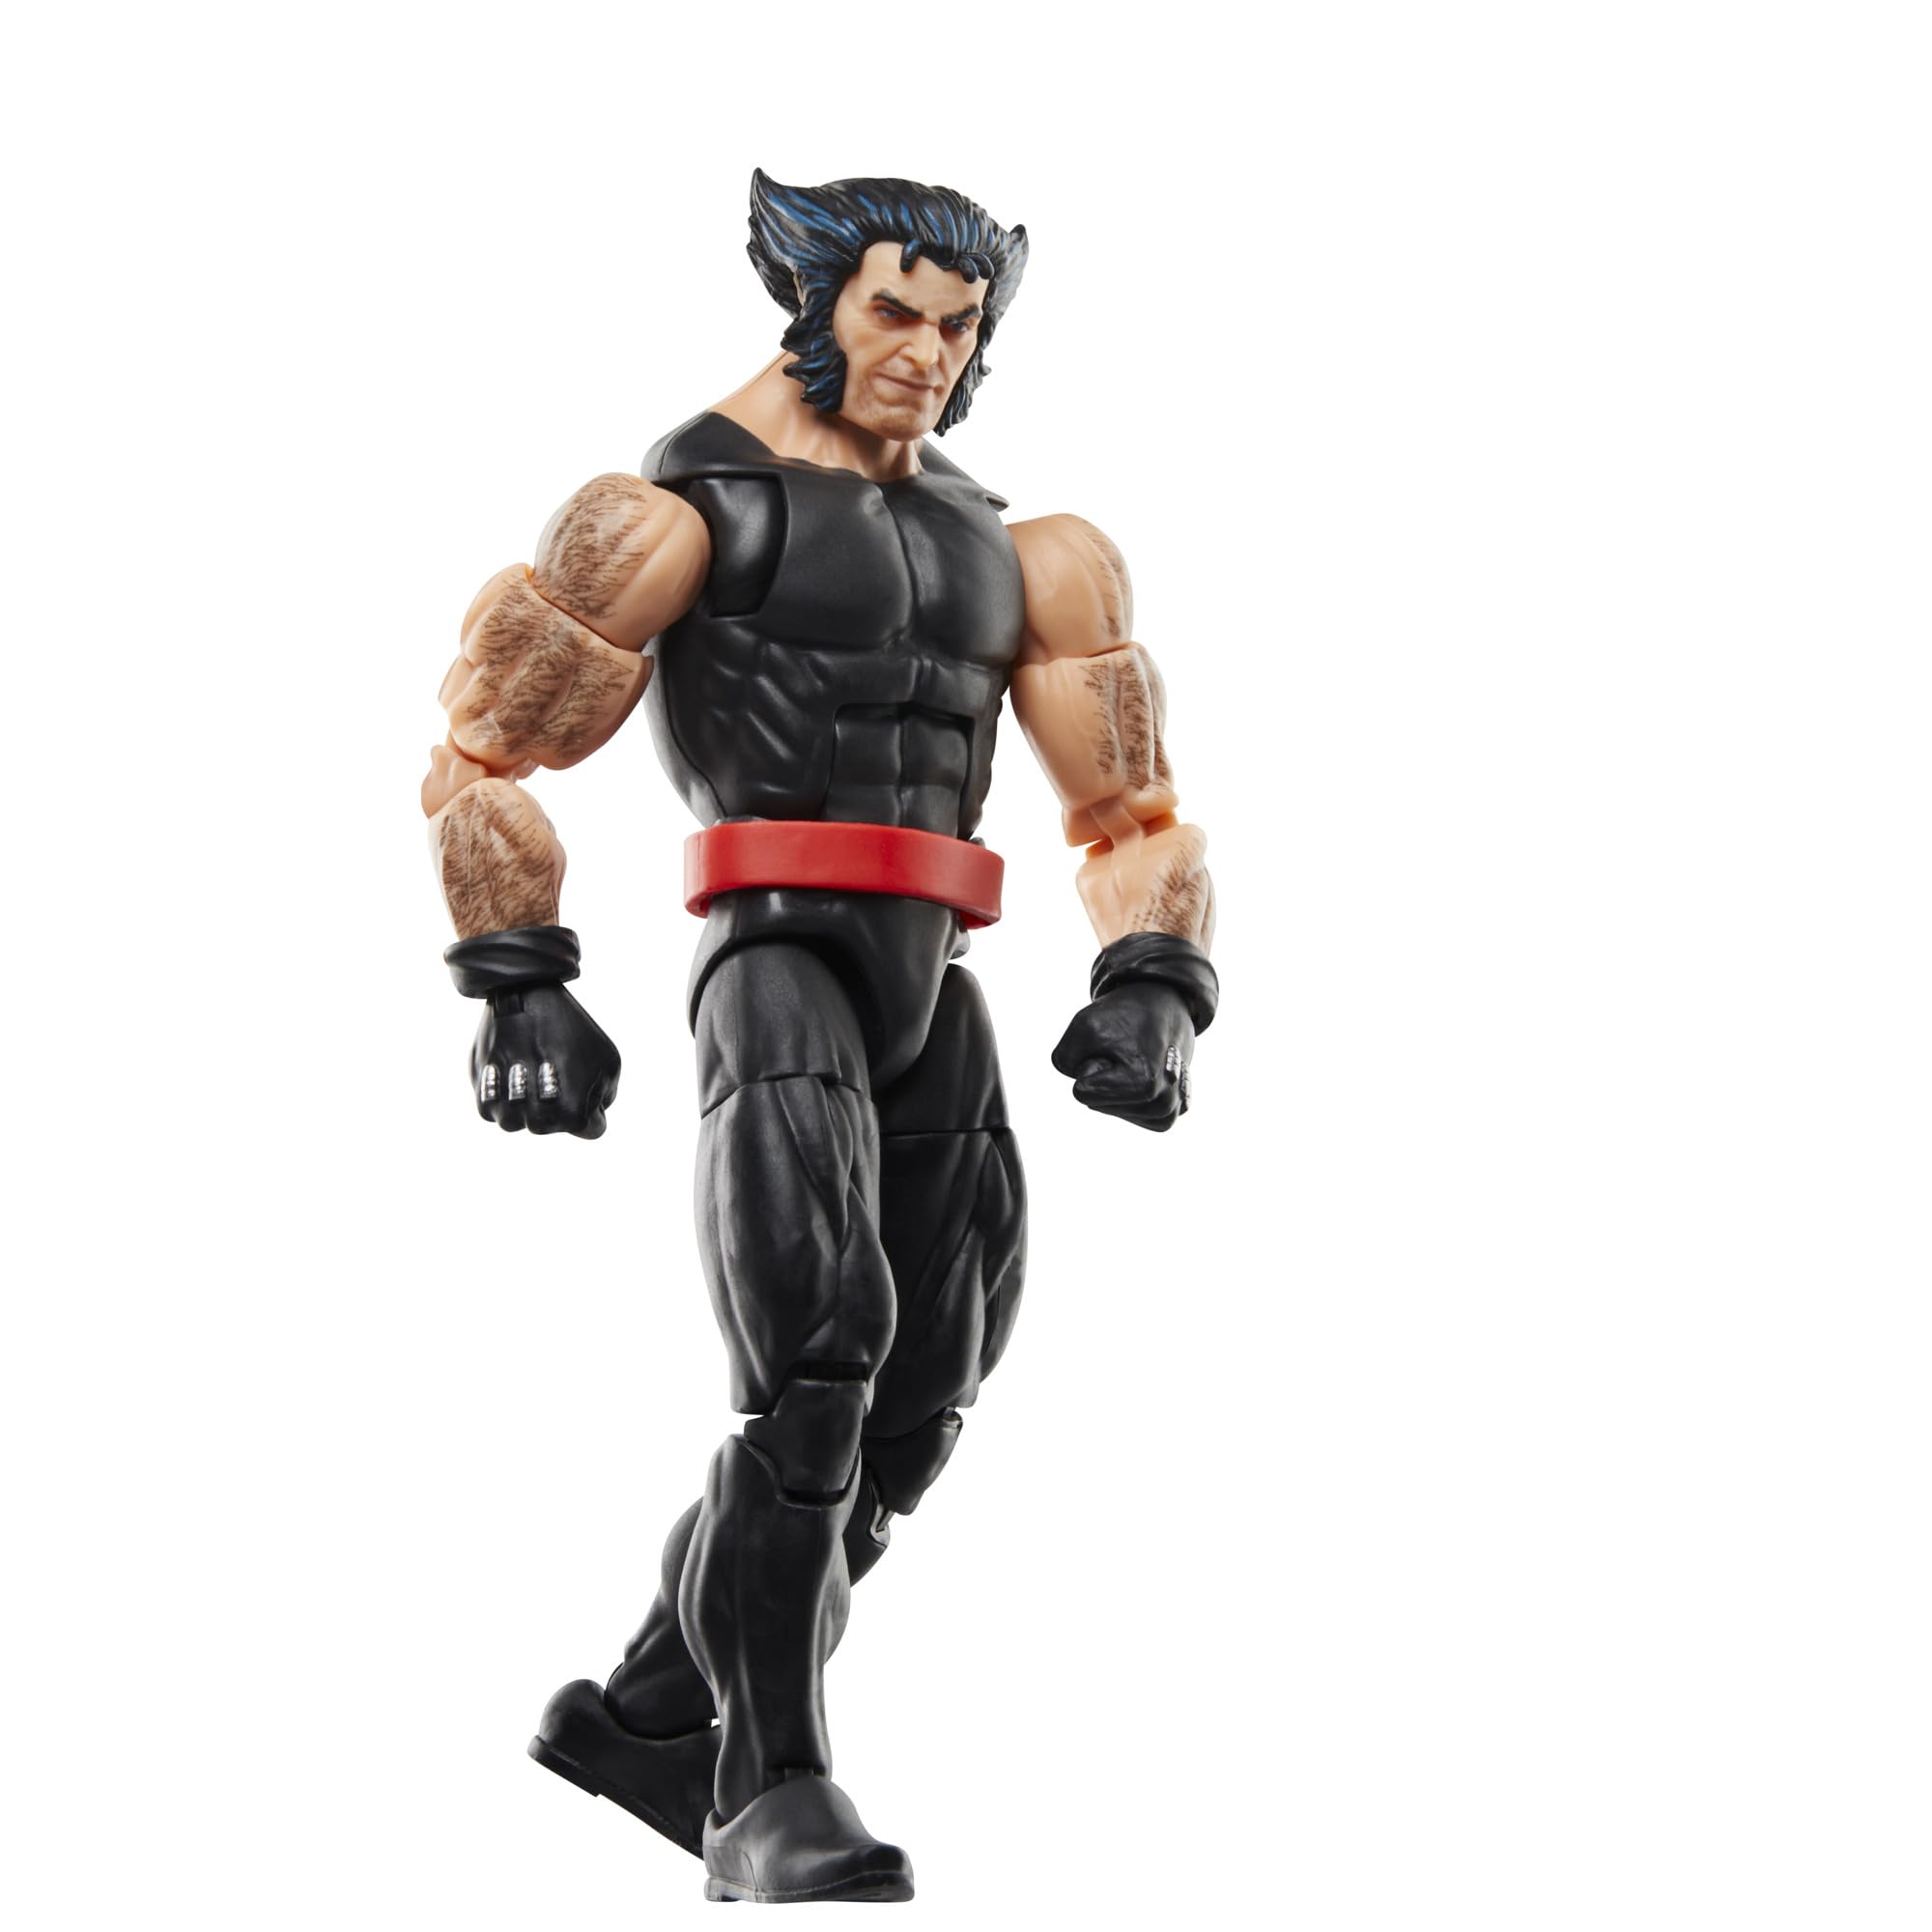 Marvel Legends Series Wolverine and Psylocke, 50th Anniversary Comics Collectible 6-Inch Action Figure 2-Pack